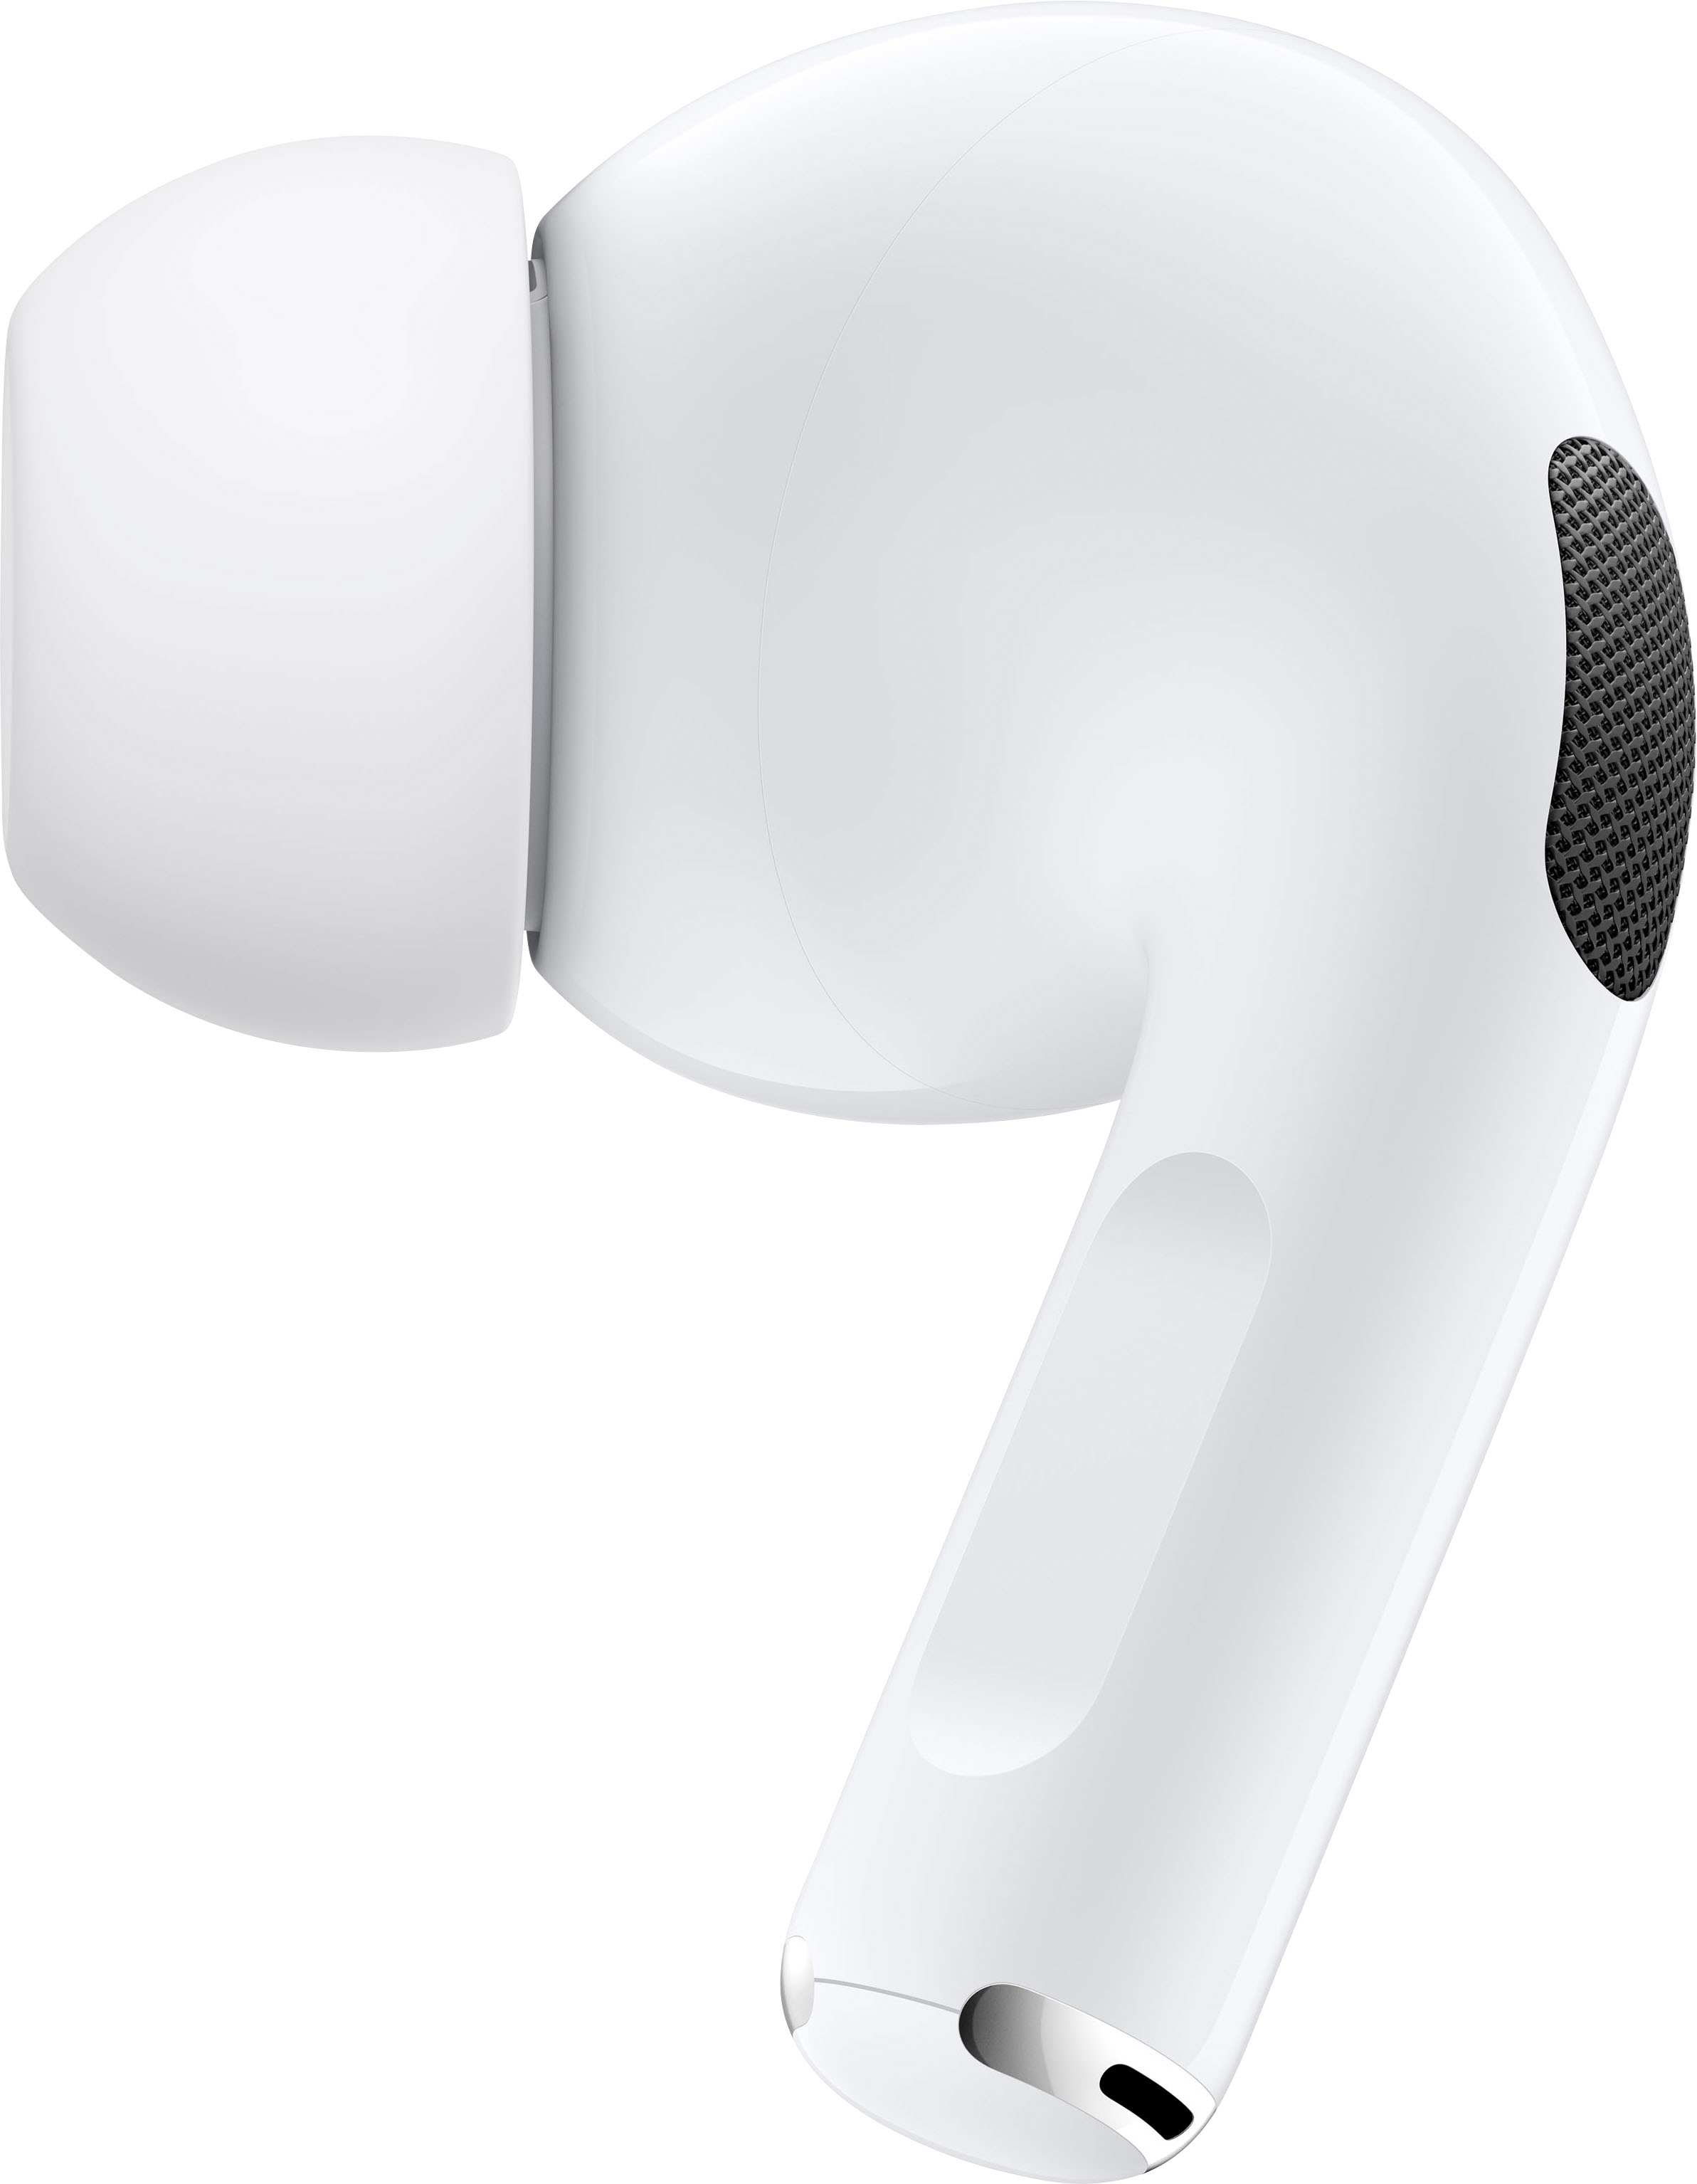 Airpods (Apple)